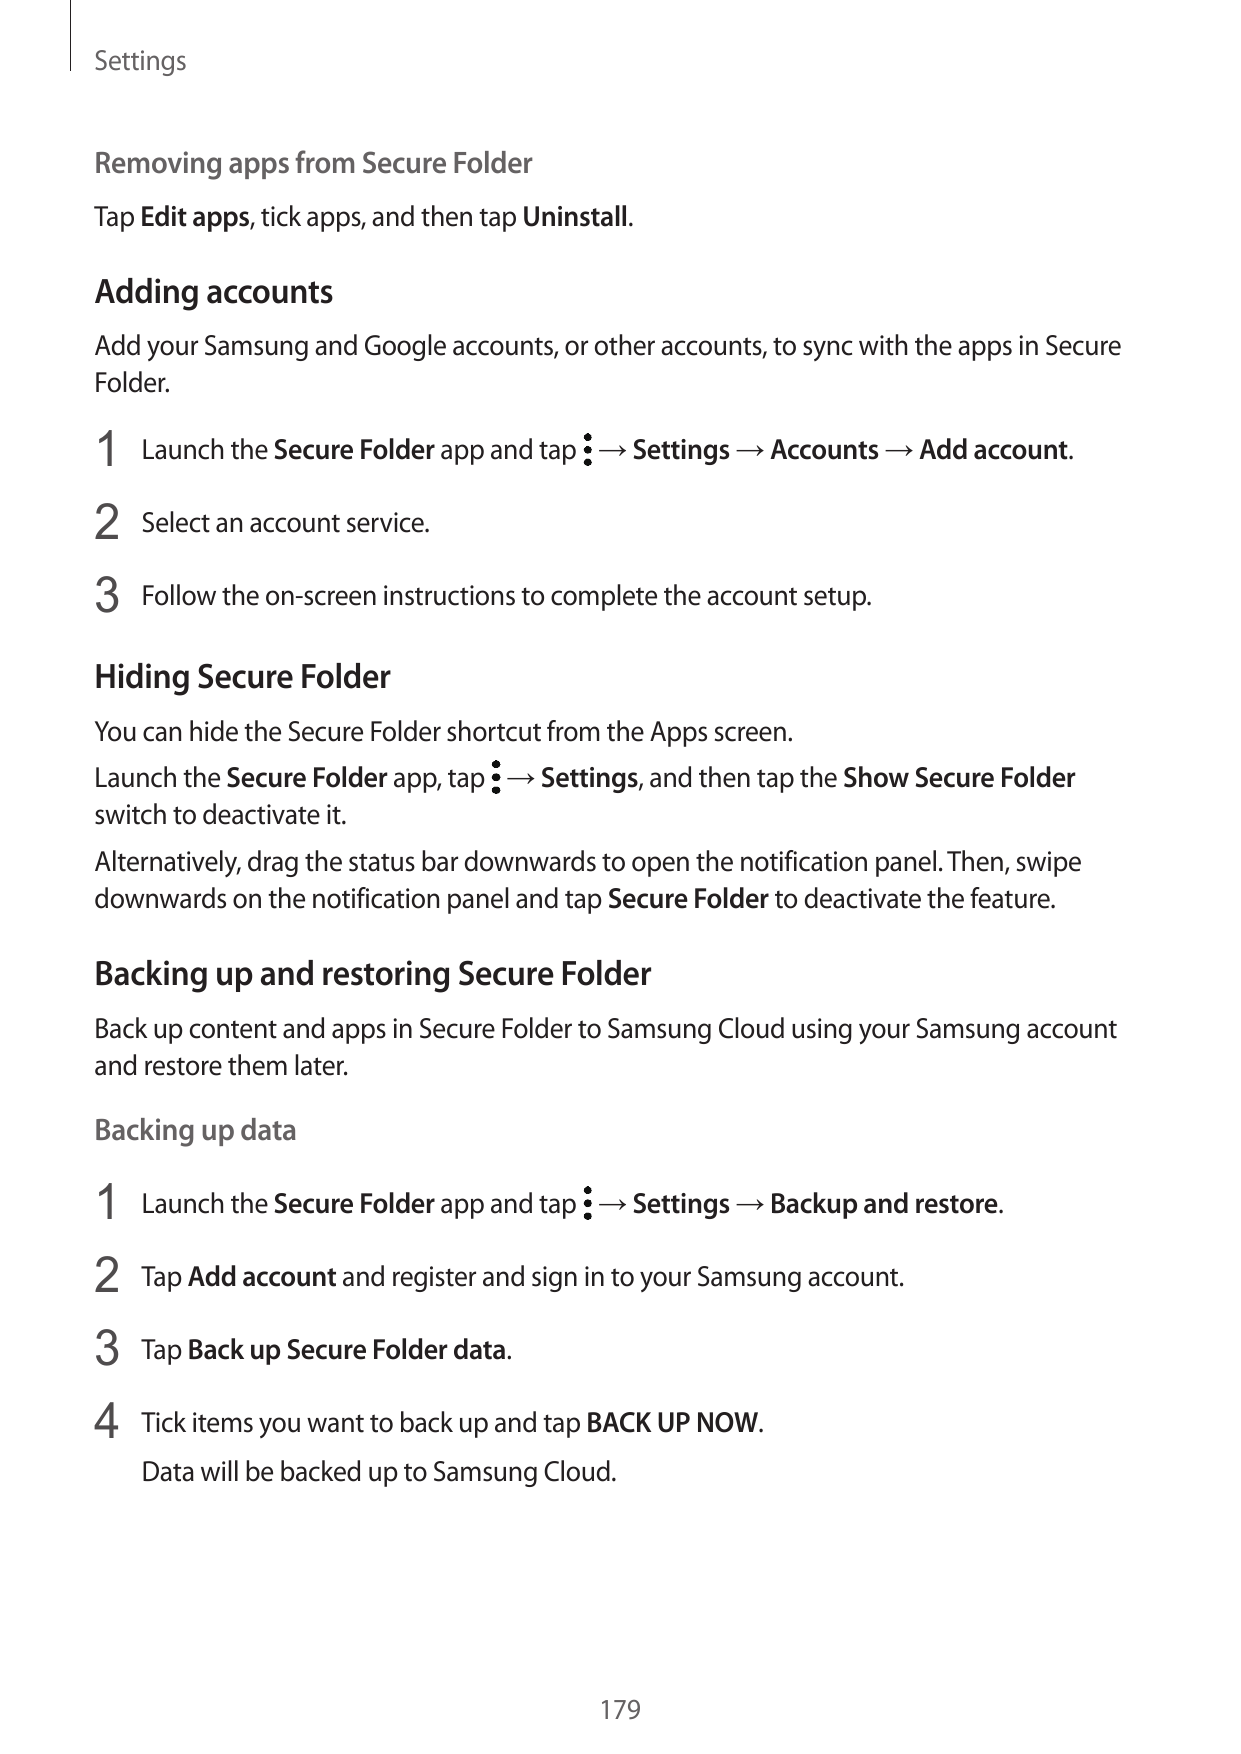 SettingsRemoving apps from Secure FolderTap Edit apps, tick apps, and then tap Uninstall.Adding accountsAdd your Samsung and Goo